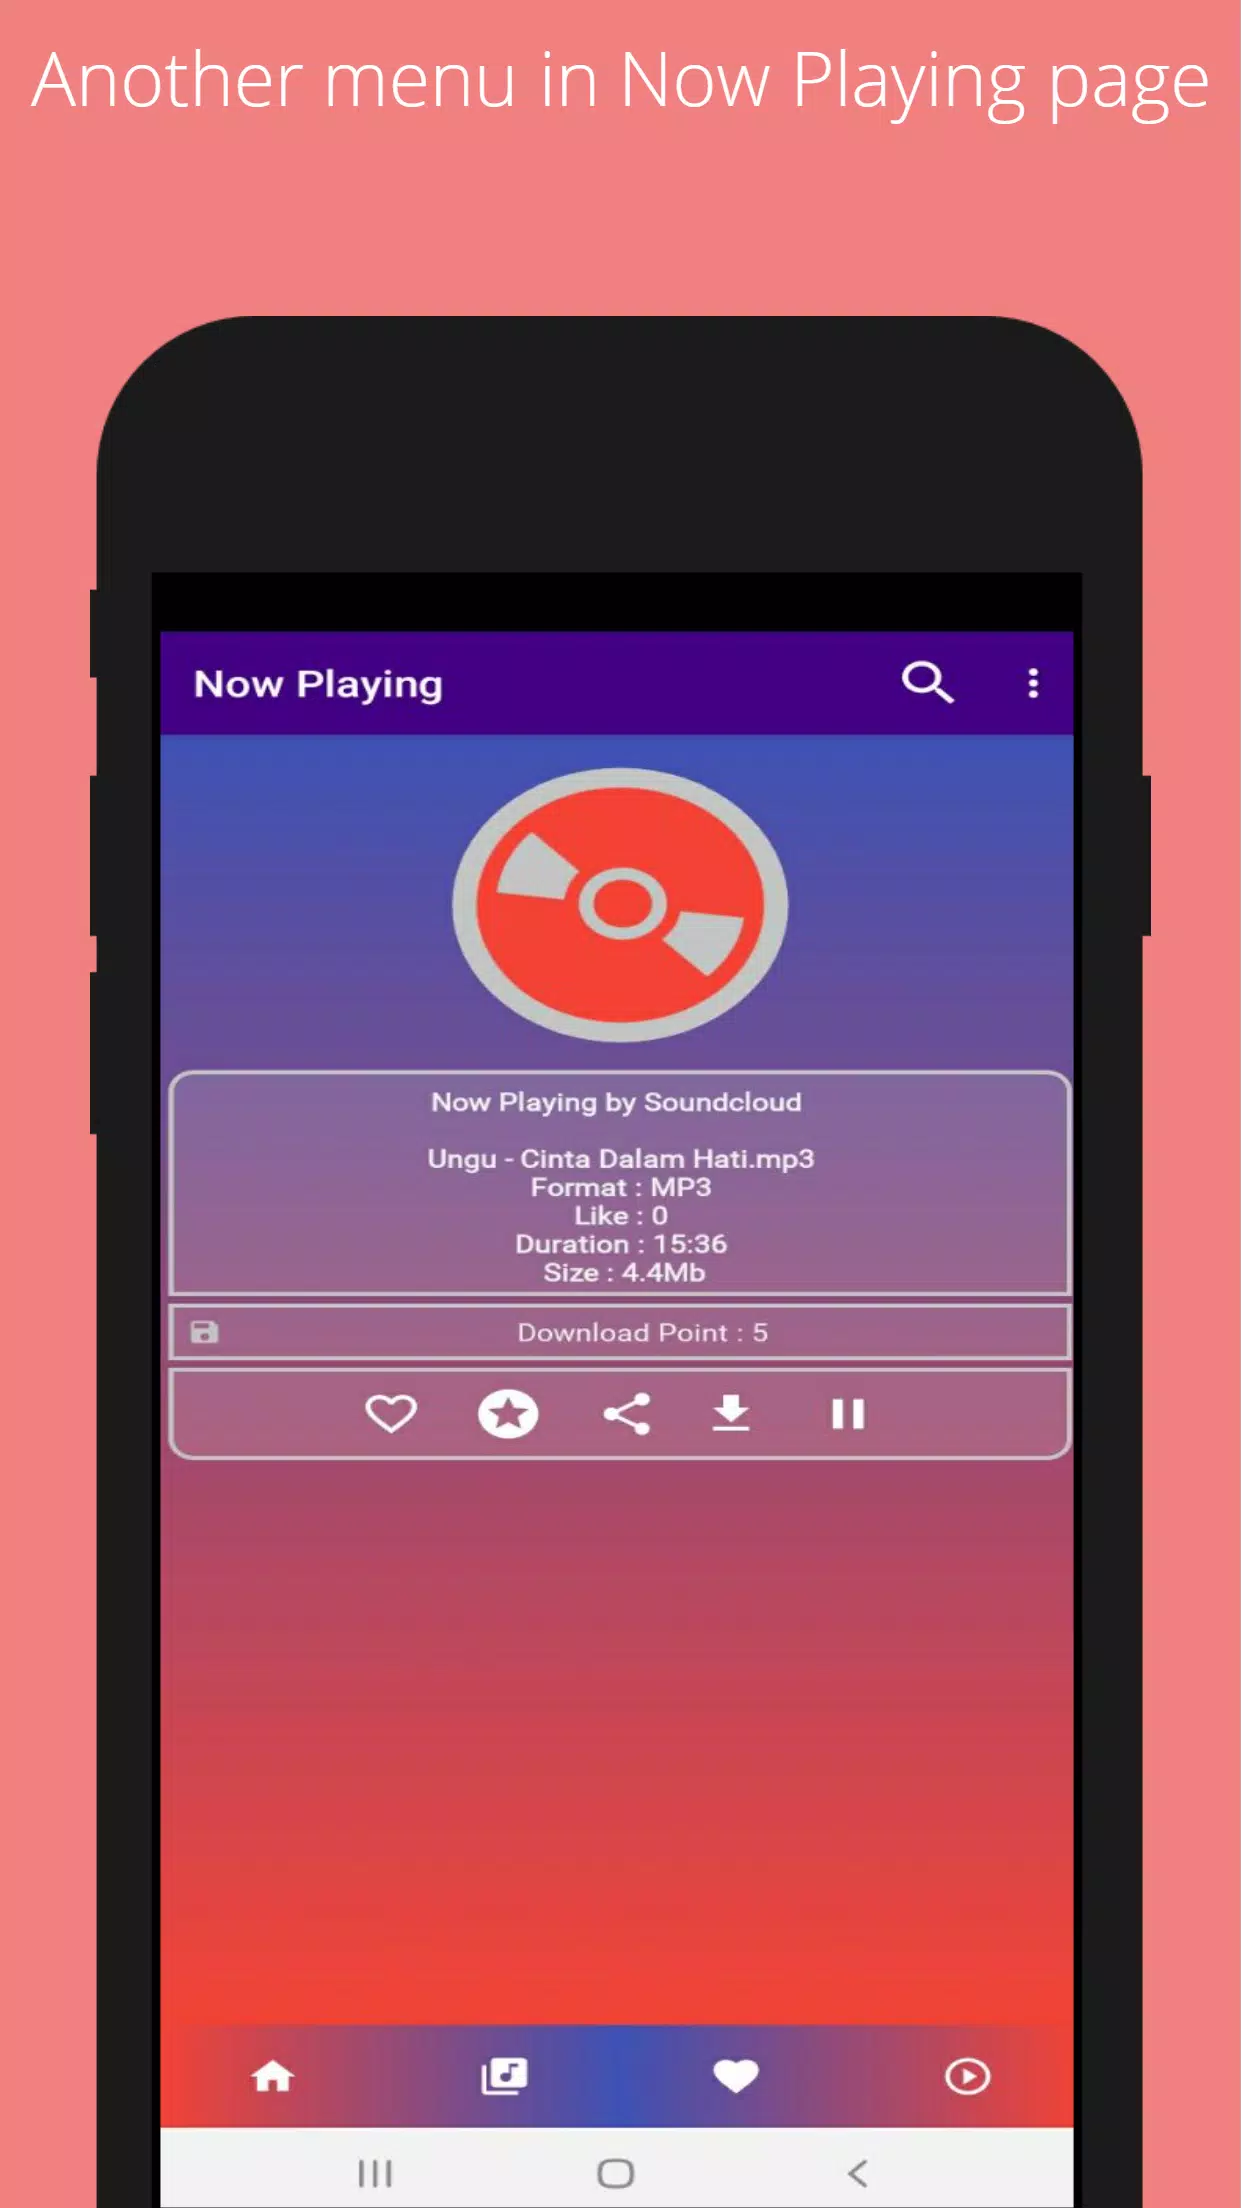 Mp3 Juice cc - Free music download unlimited APK for Android Download